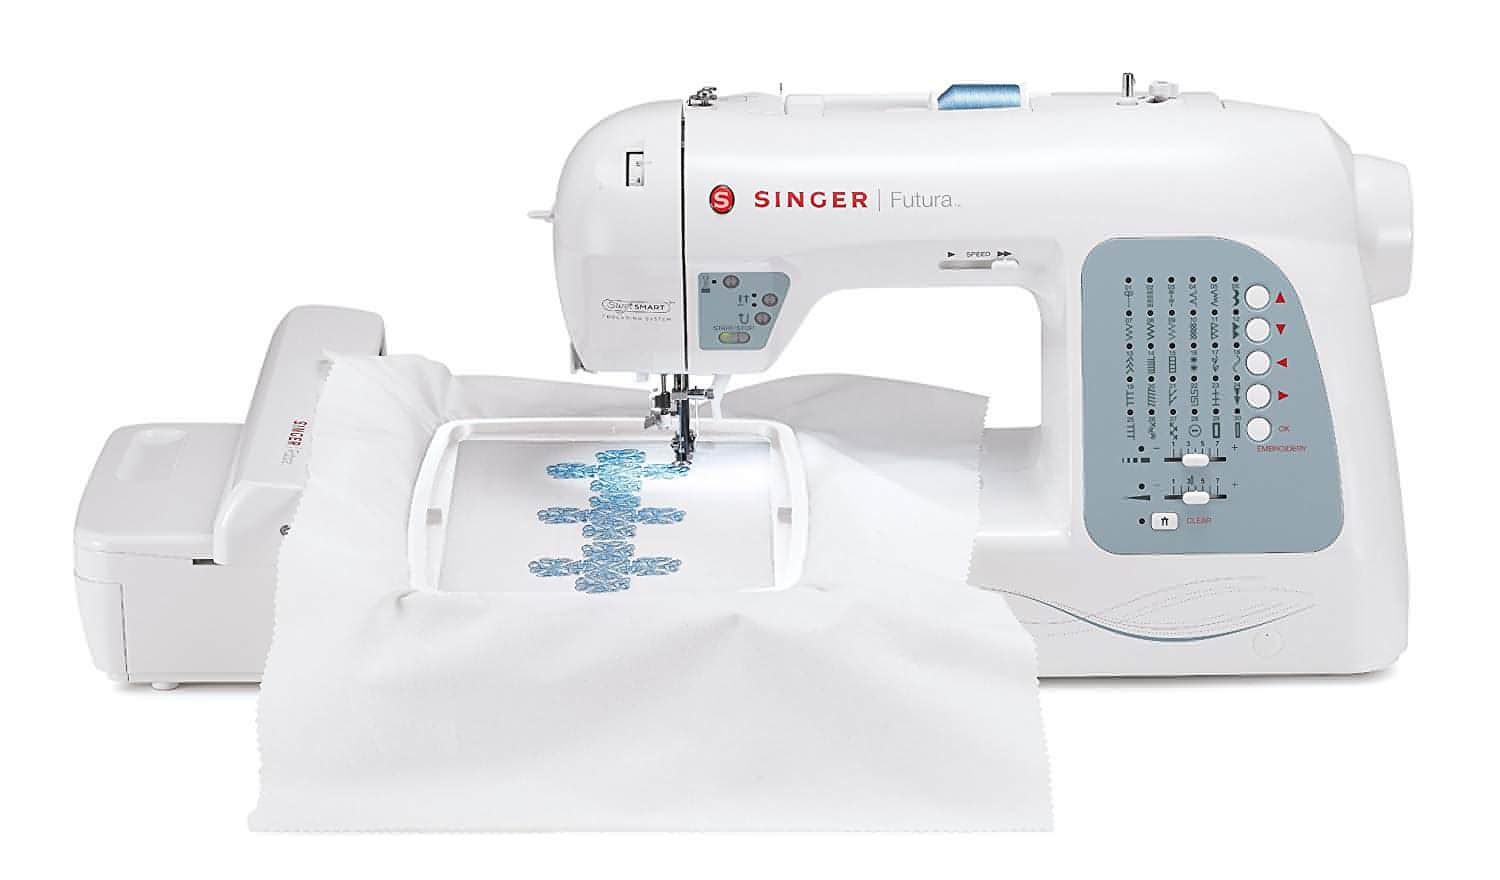 Singer Futura XL400 - Sewing & Embroidery Machine - Good as New